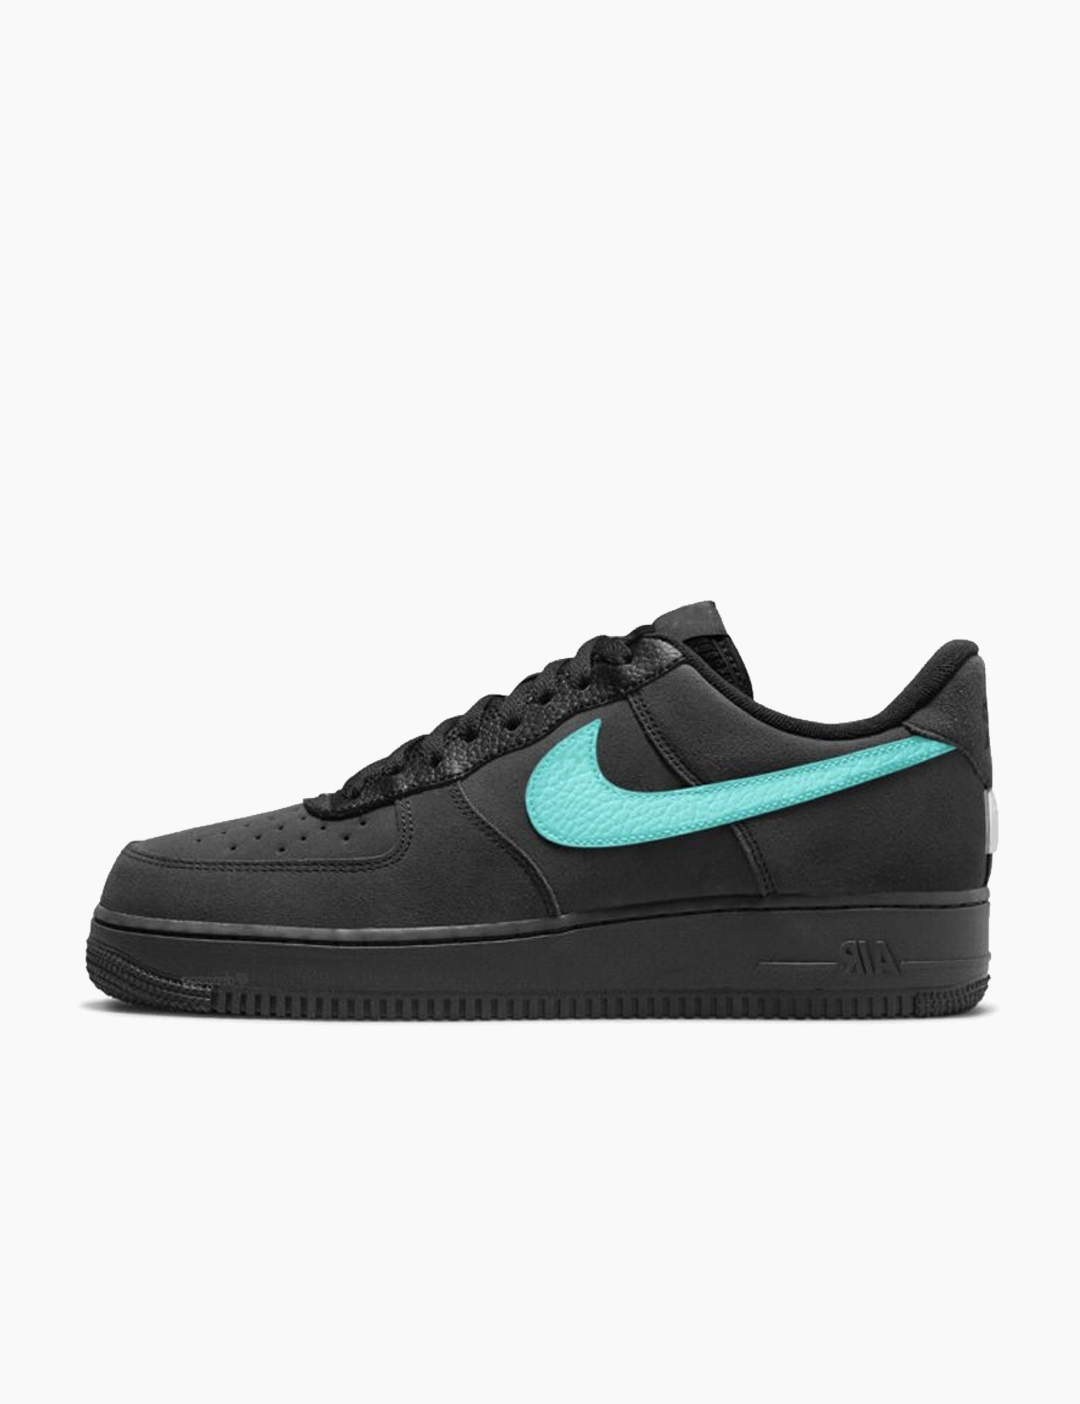 Tiffany & Co. x Nike Air Force 1 Low Release 2023 | Drops | Hypebeast